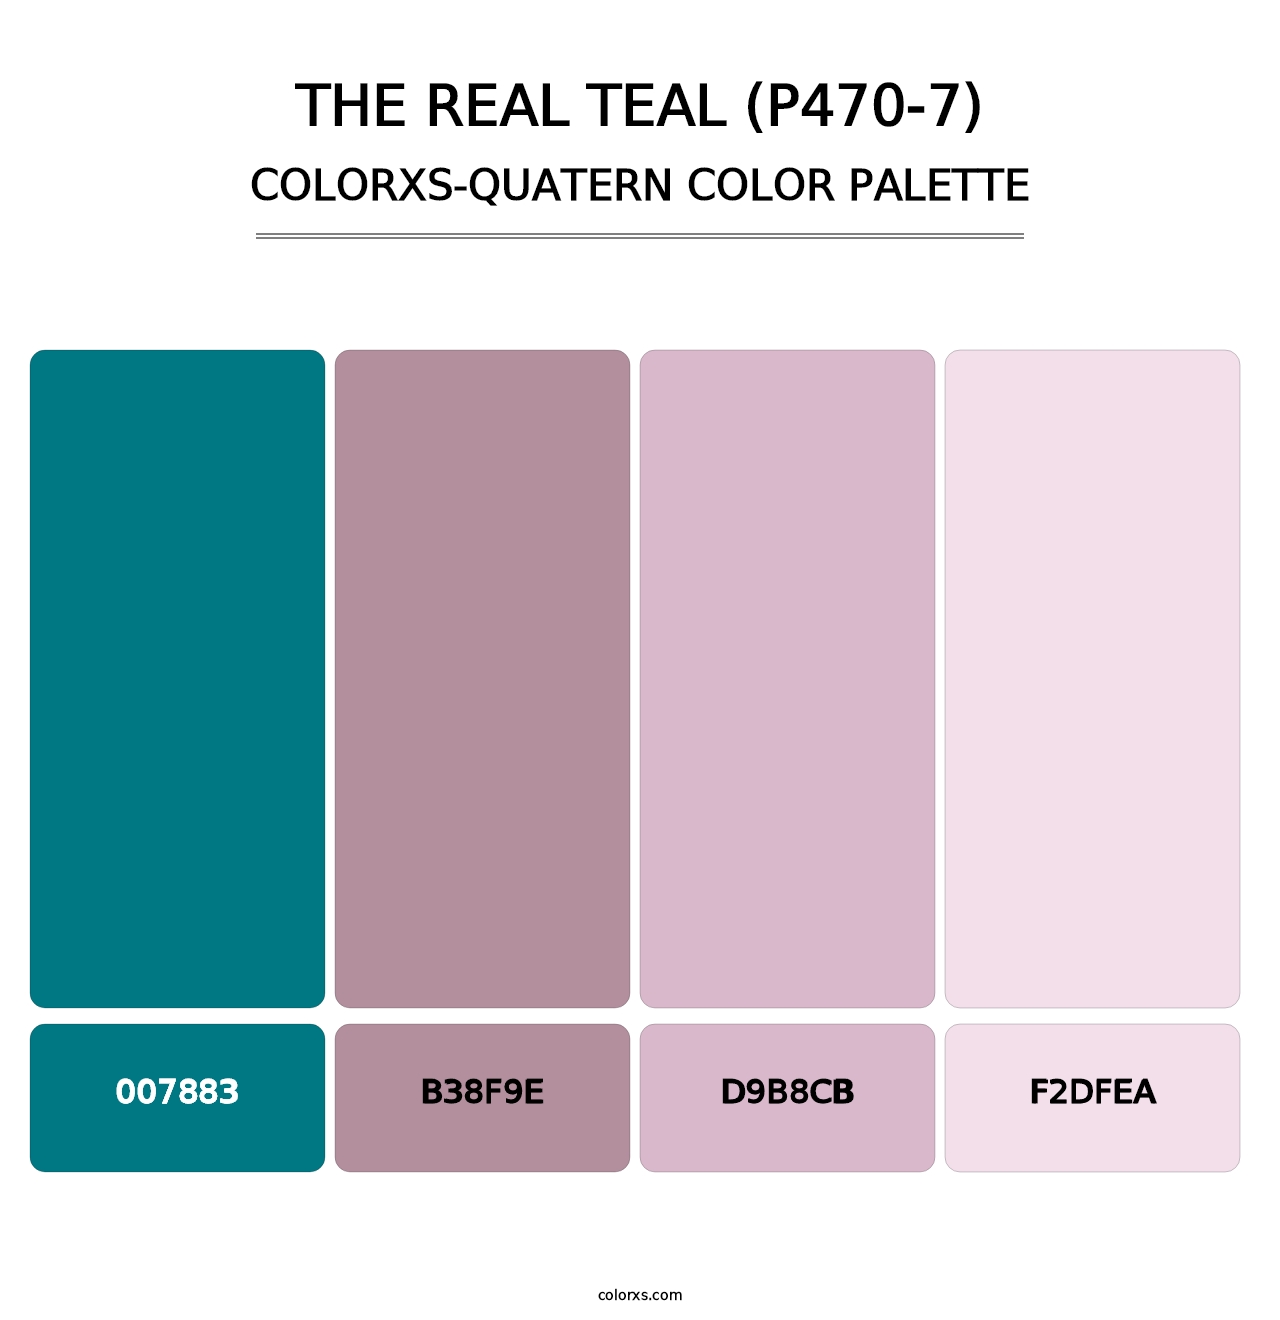 The Real Teal (P470-7) - Colorxs Quatern Palette